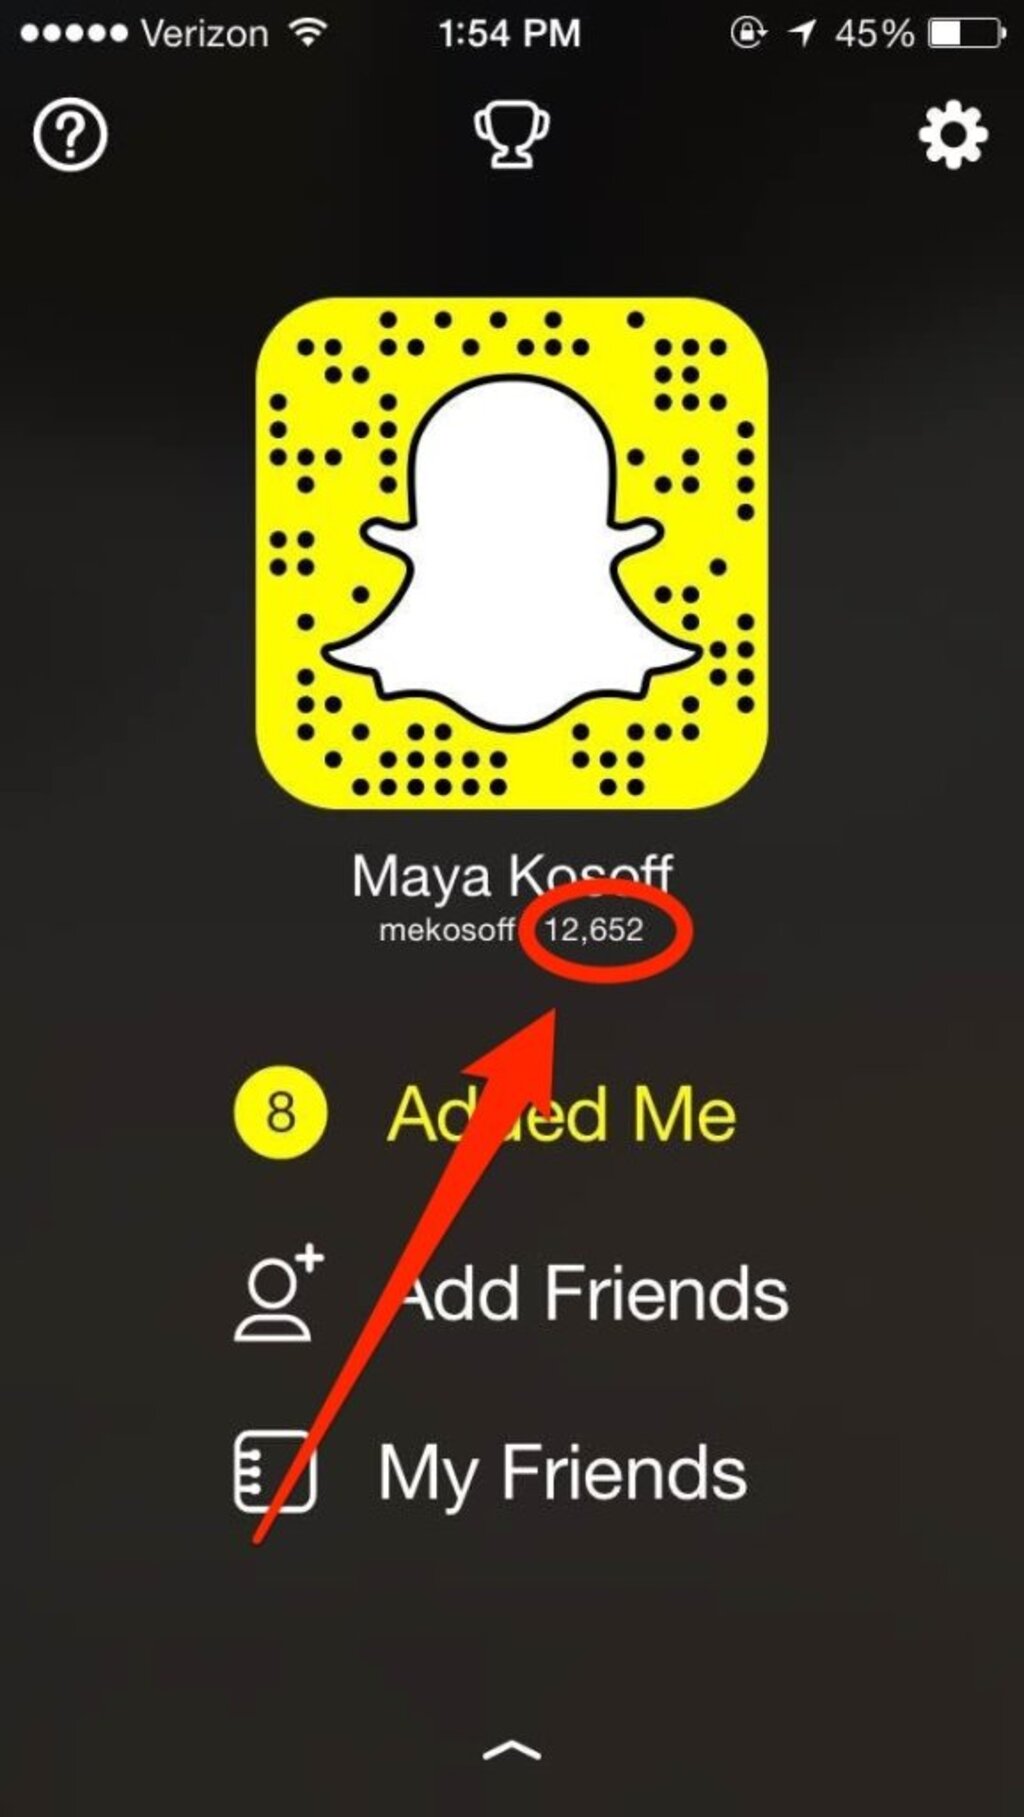 how to hide snapchat score